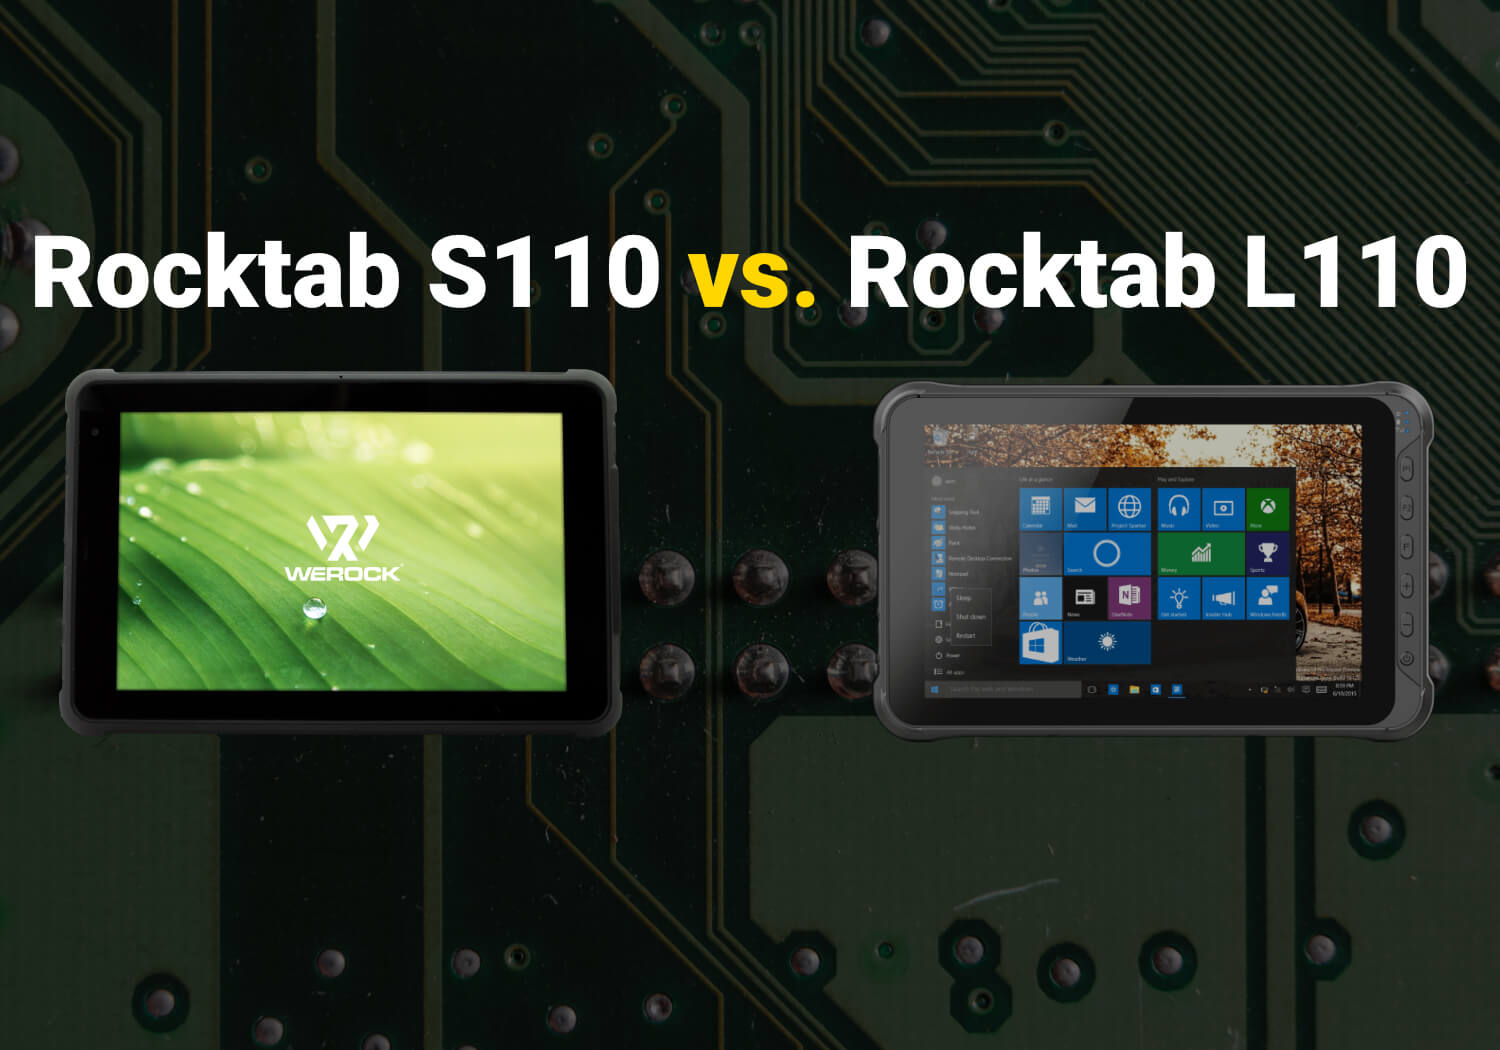 two Front facing Rugged tablets - Rocktab S110 on the left side, Rocktab L110 on the right side